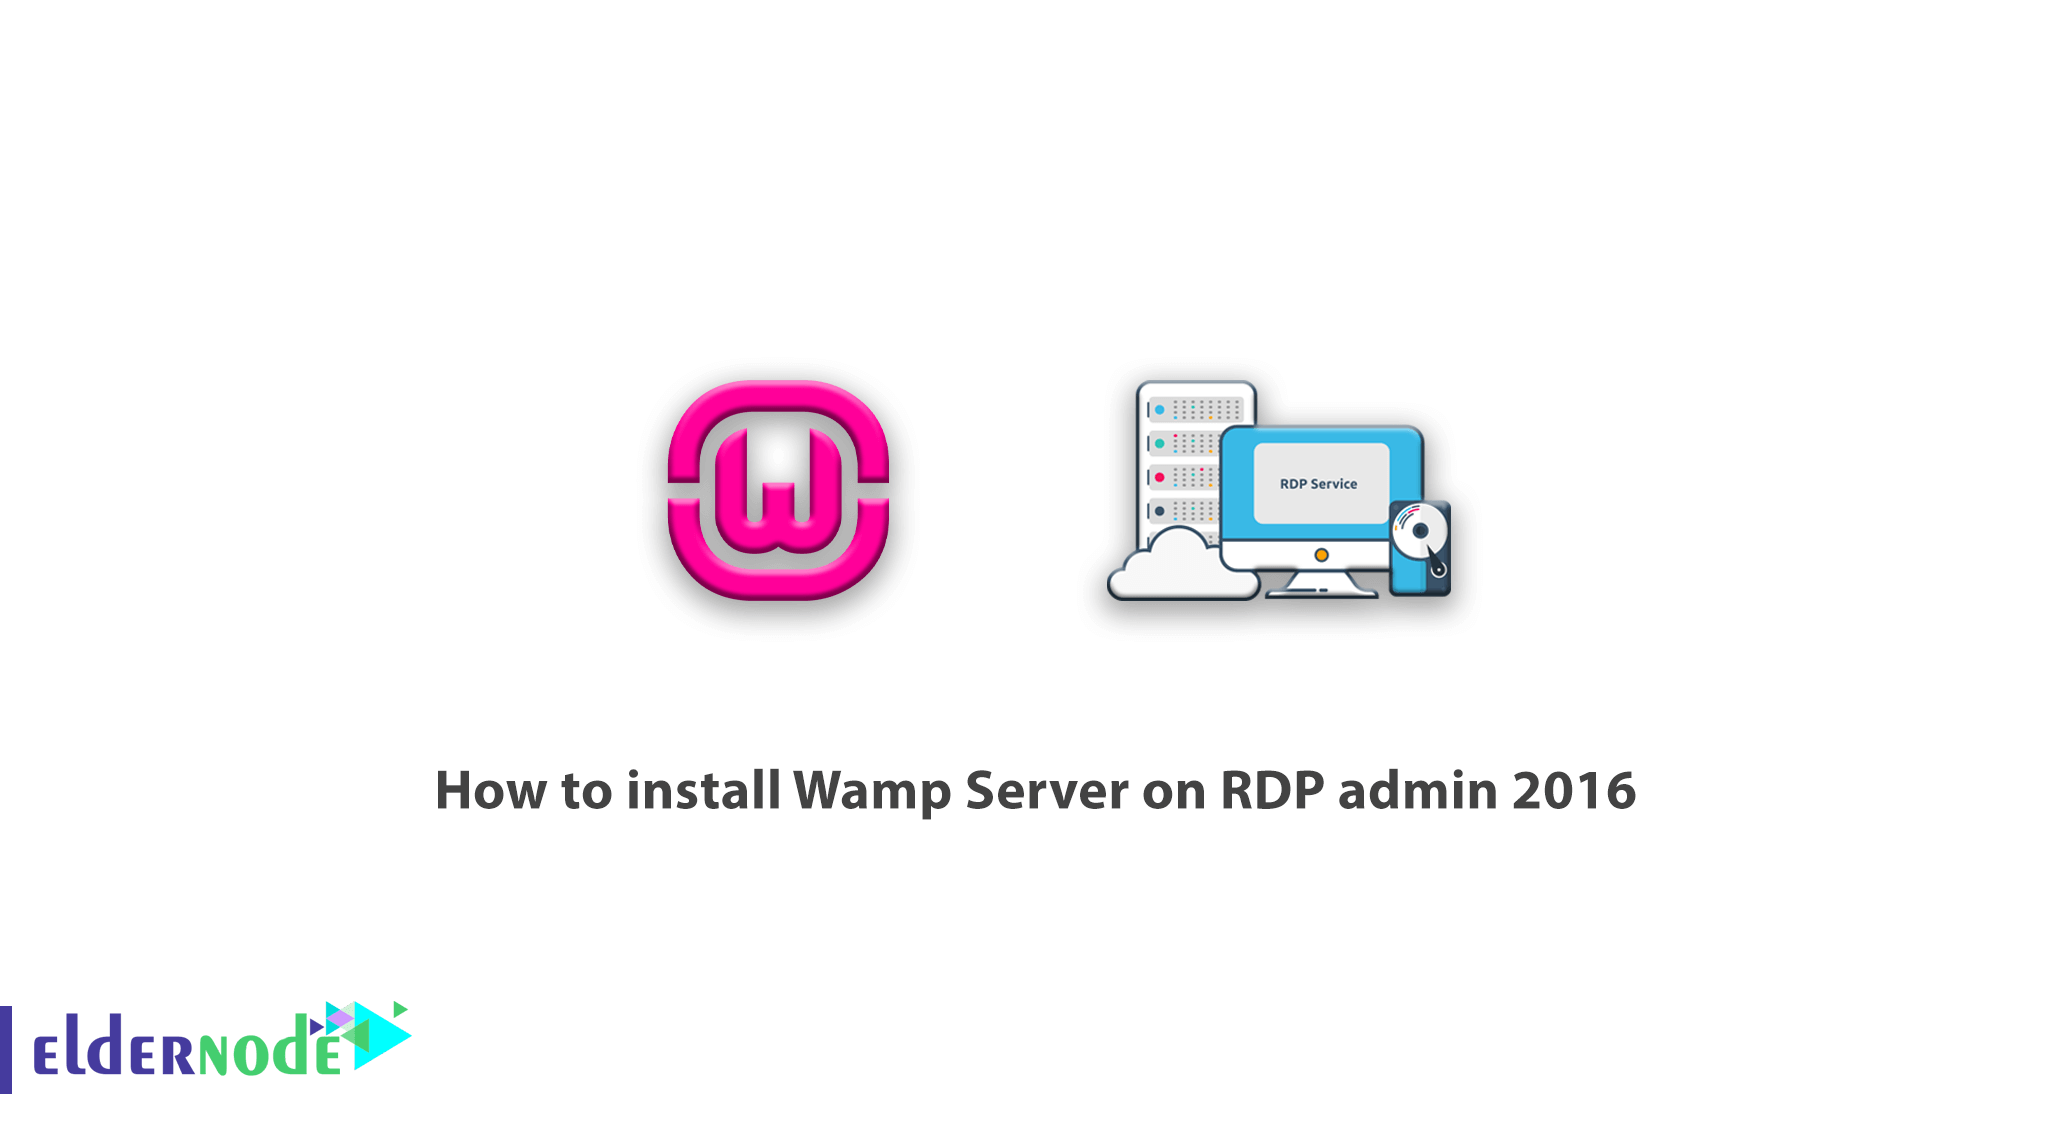 How to install Wamp Server on RDP admin 2016